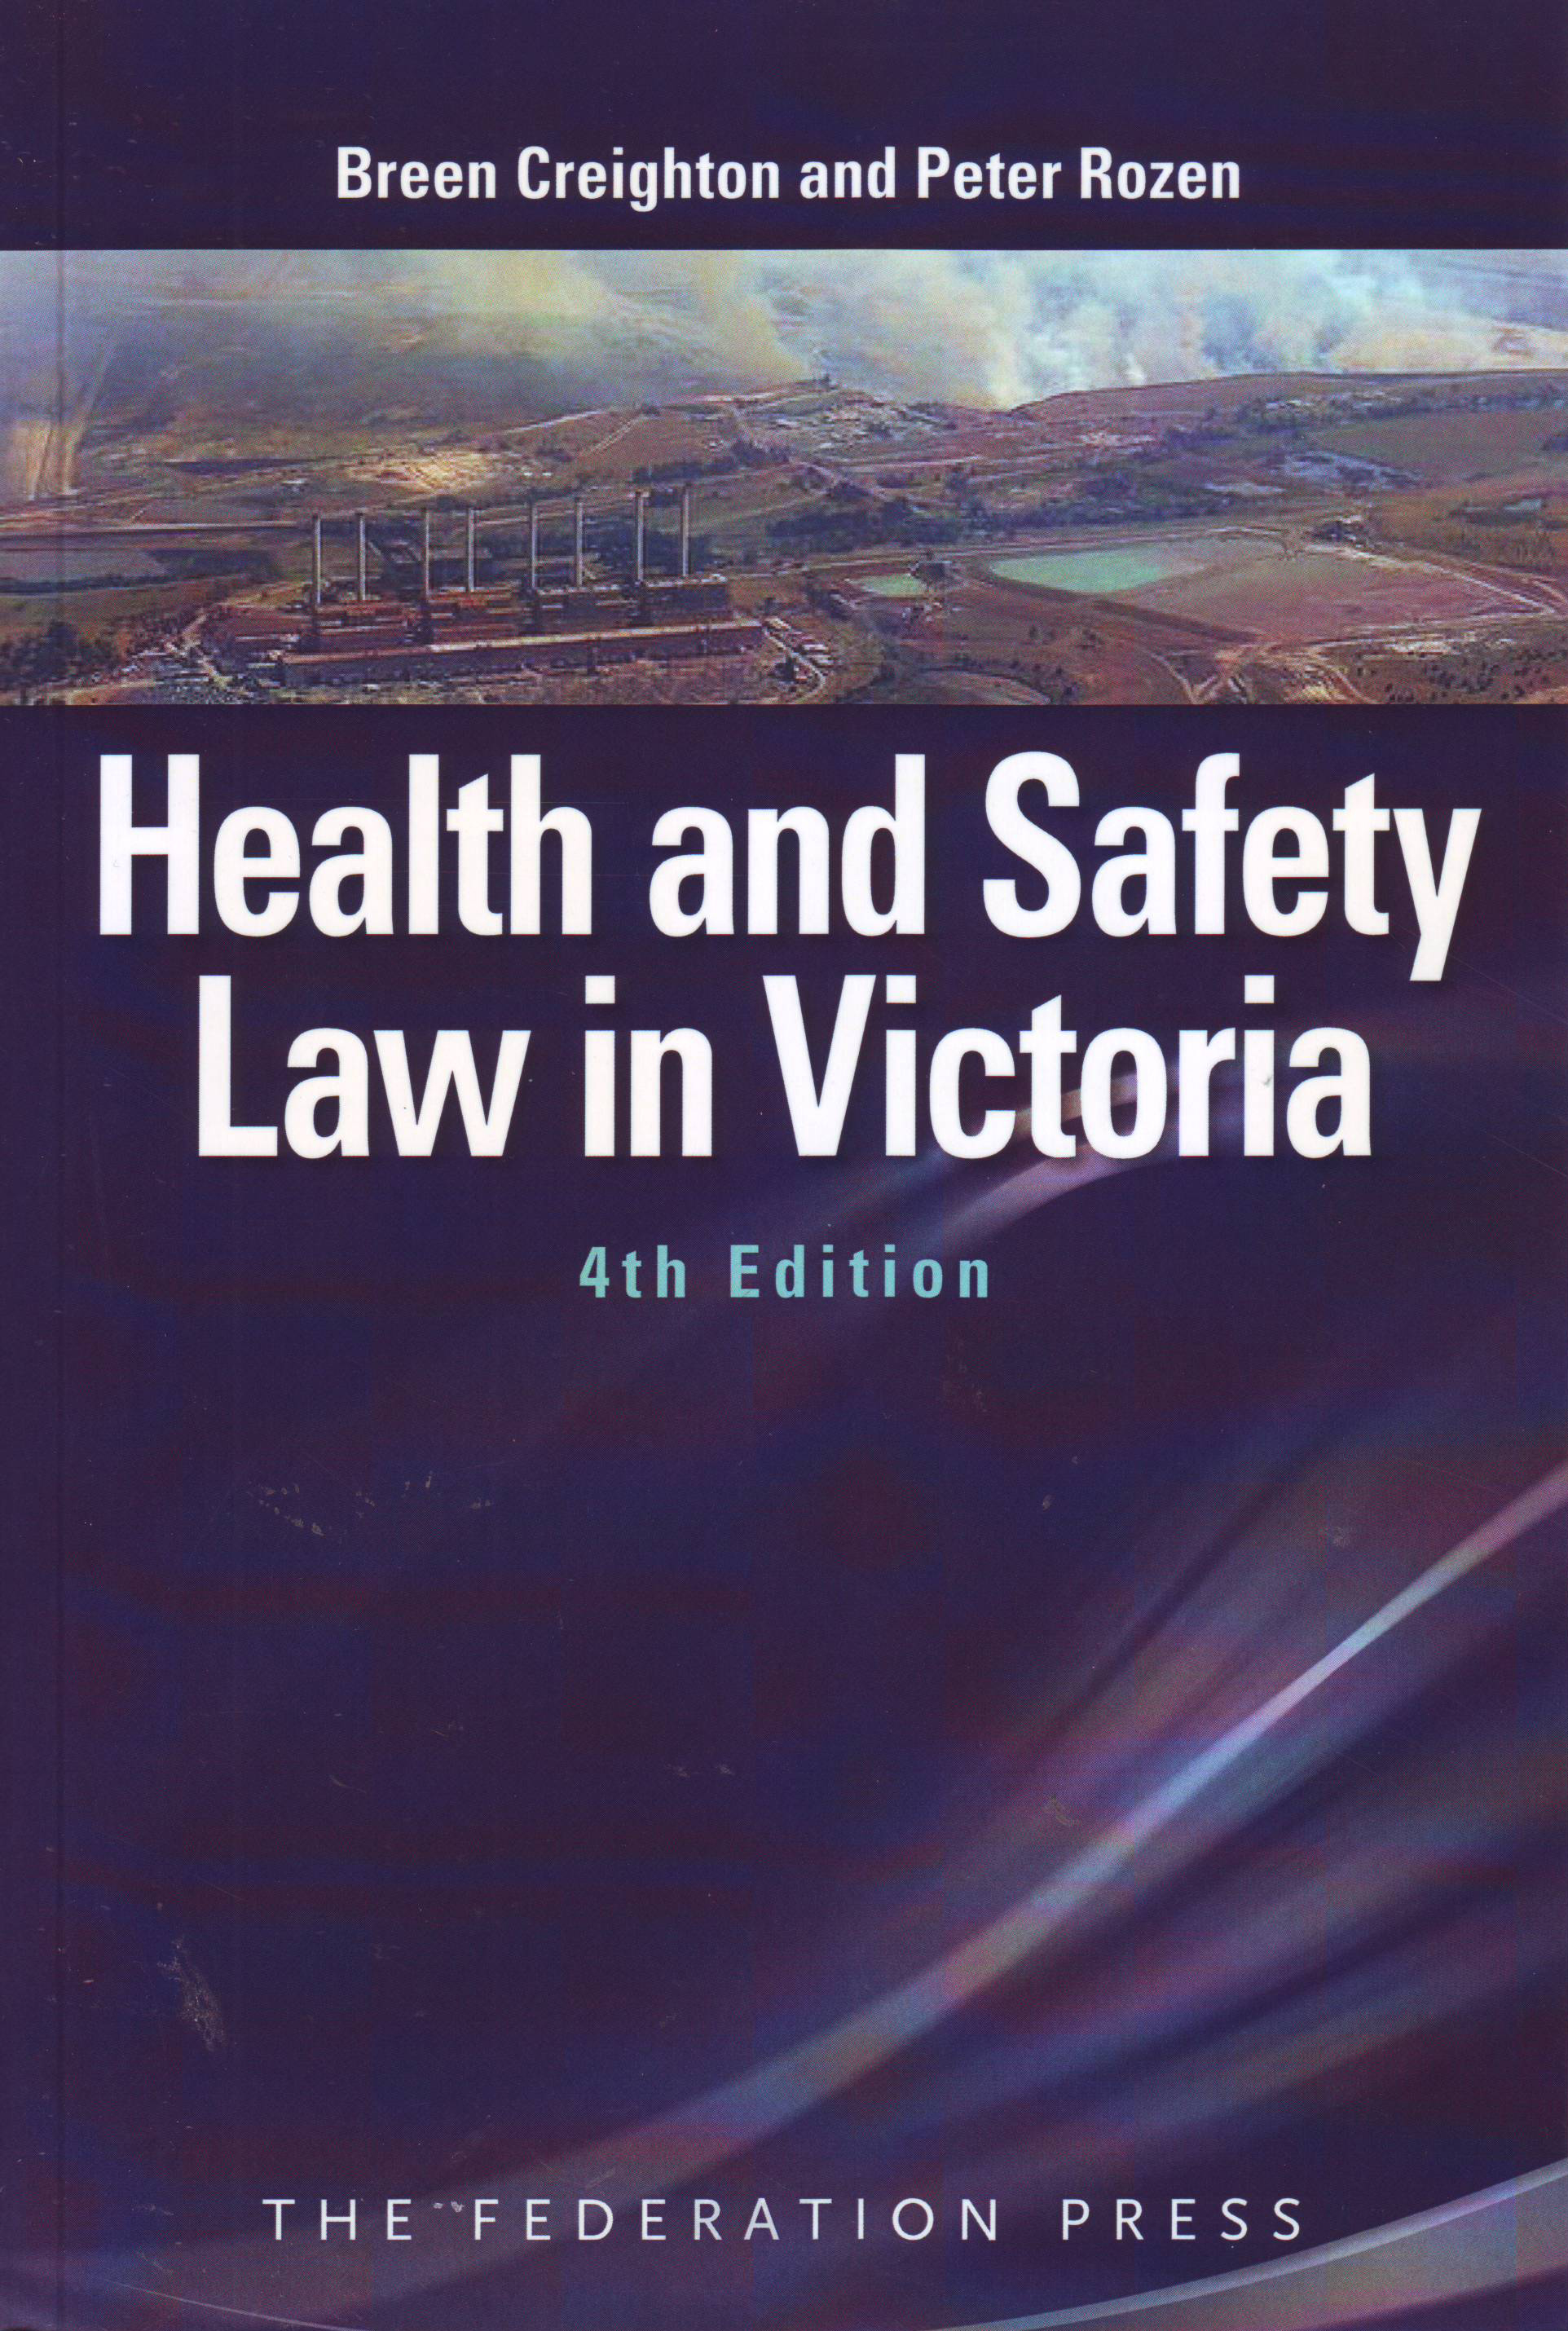 Health and Safety Law in Victoria e4